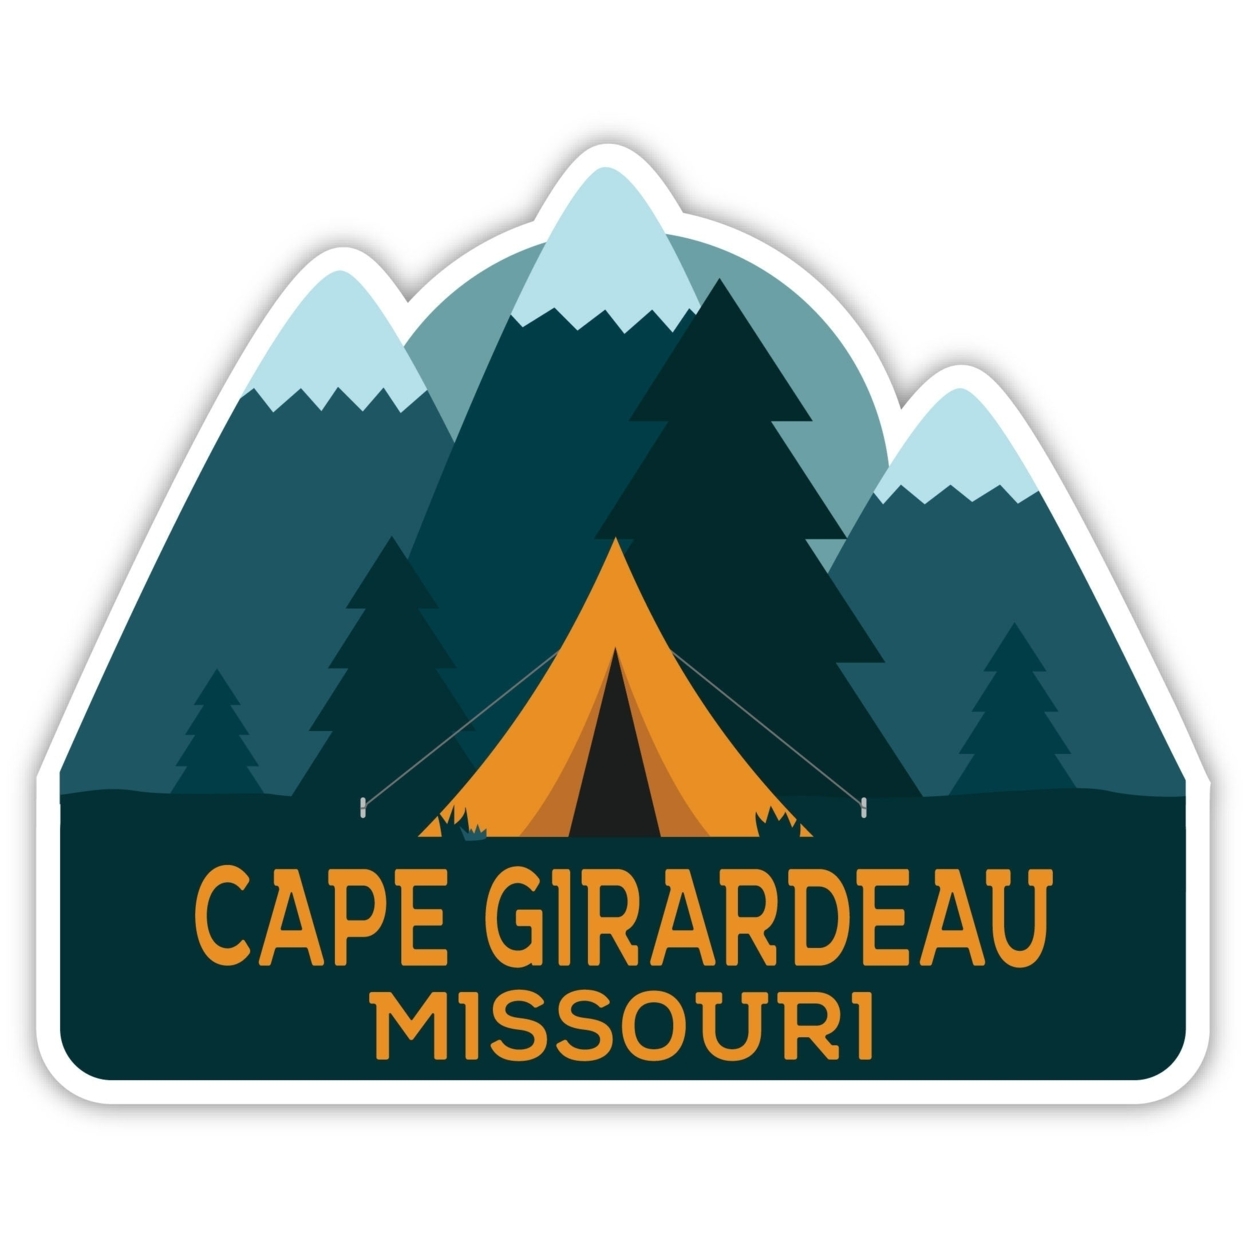 Cape Girardeau Missouri Souvenir Decorative Stickers (Choose Theme And Size) - 4-Pack, 10-Inch, Great Outdoors